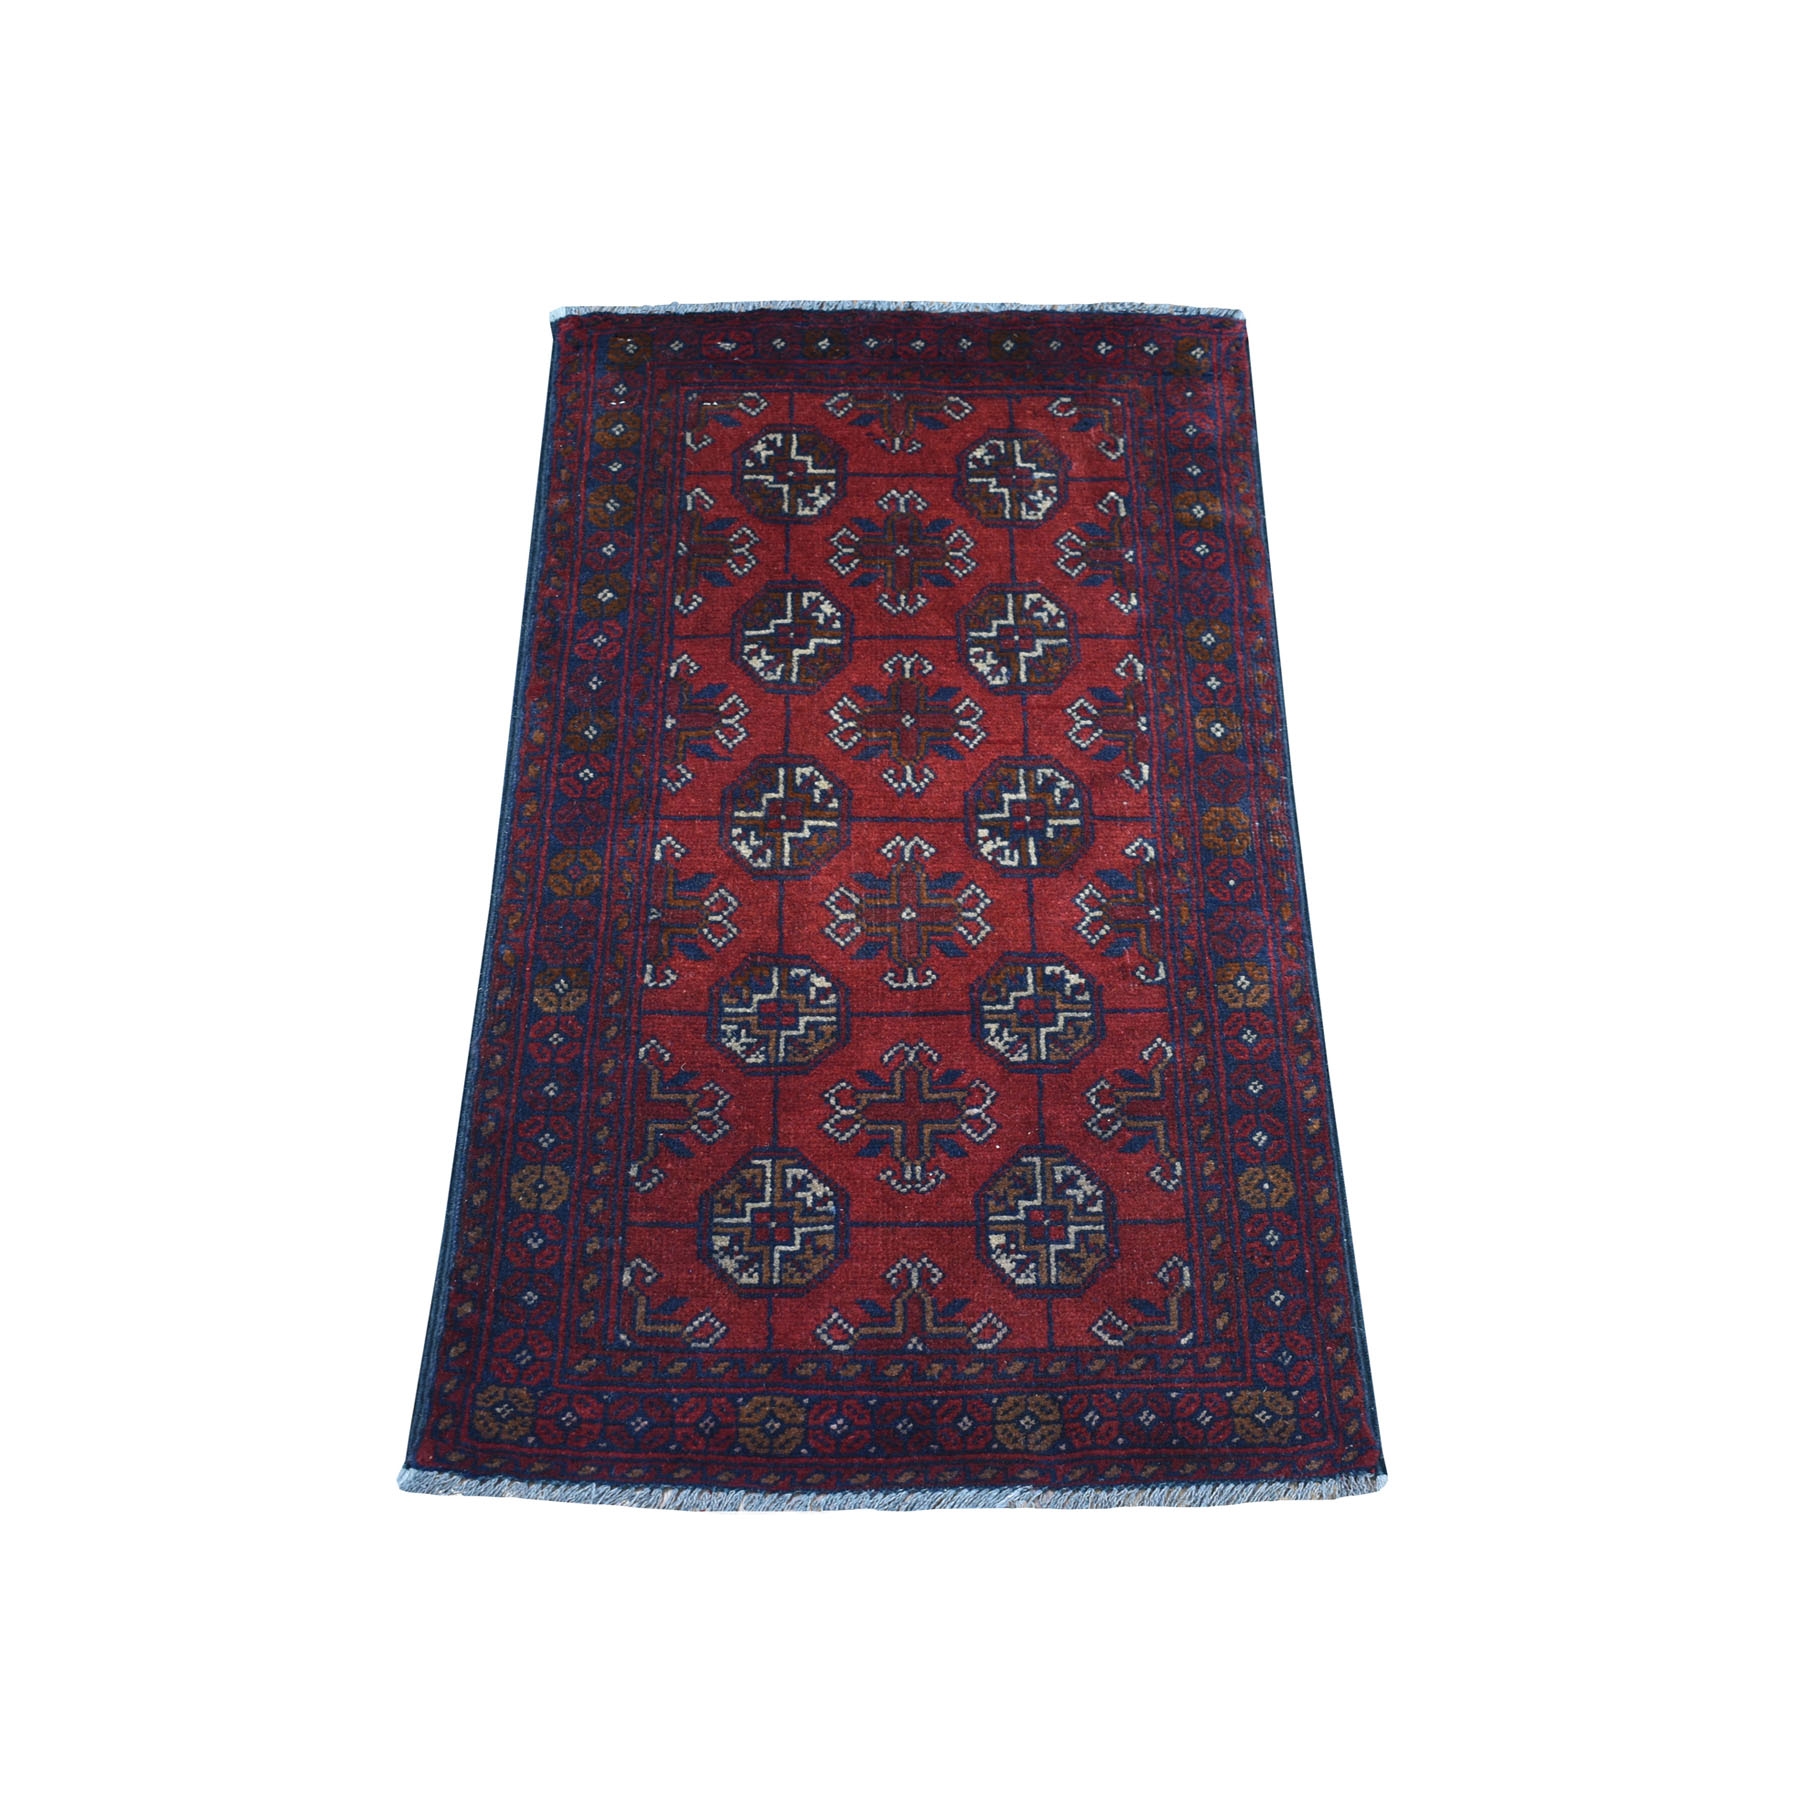 1'8"X3'2" Deep And Saturated Red Elephant Feet Afghan Andkhoy Pure Wool Hand Knotted Oriental Rug moaec7b9